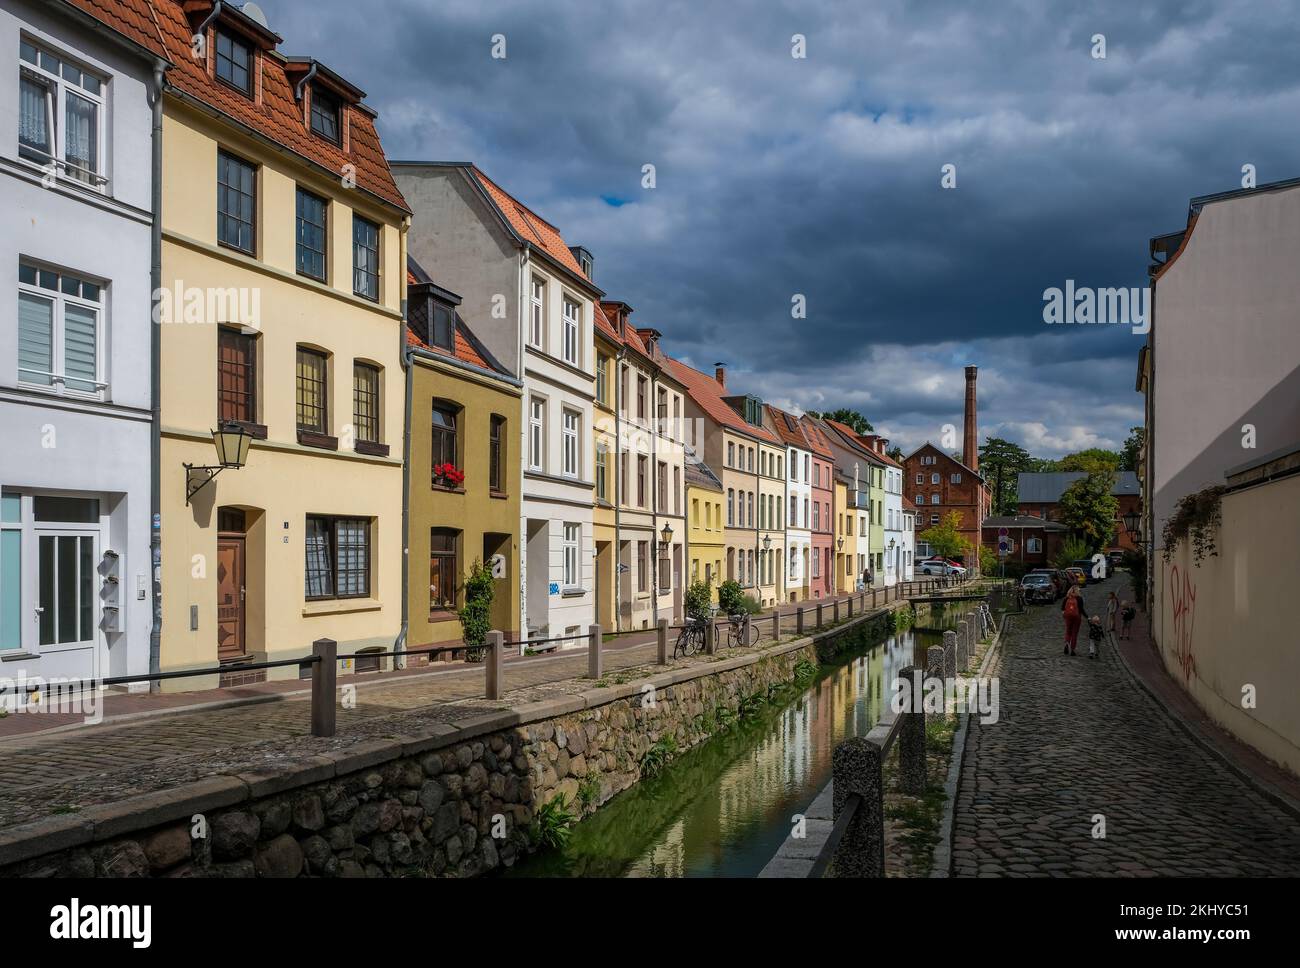 Wismar, Mecklenburg-Vorpommern, Germany - Restored old town of the Hanseatic city of Wismar, restored colorful eaves houses at the Muehlengrube, histo Stock Photo